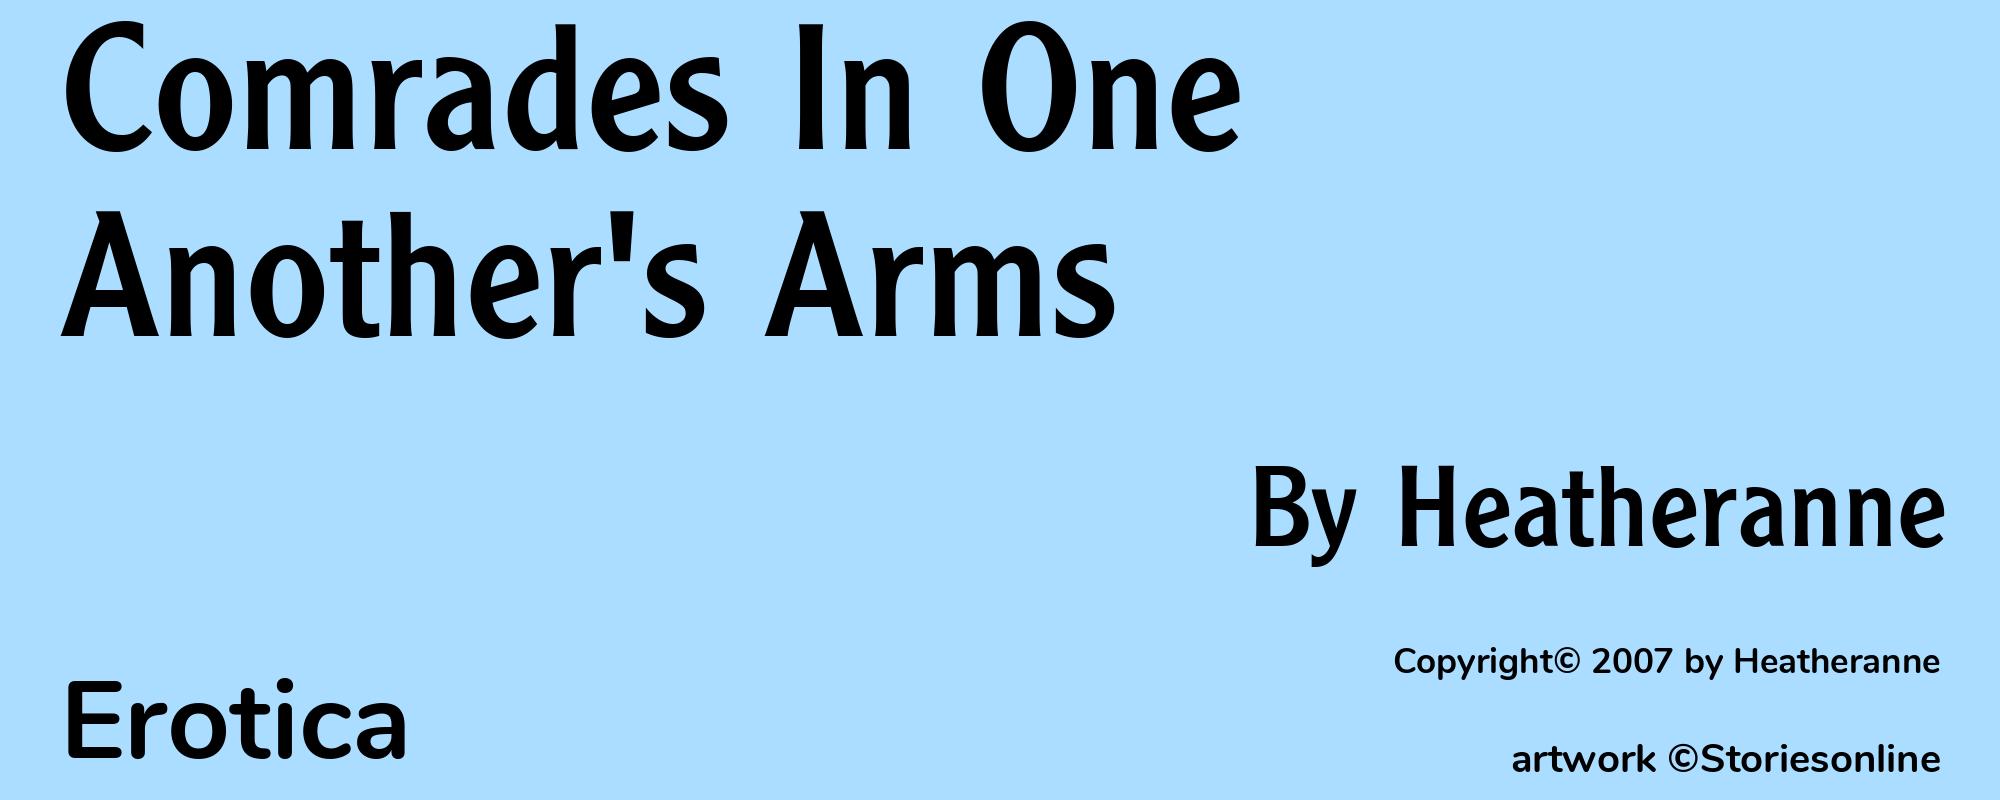 Comrades In One Another's Arms - Cover